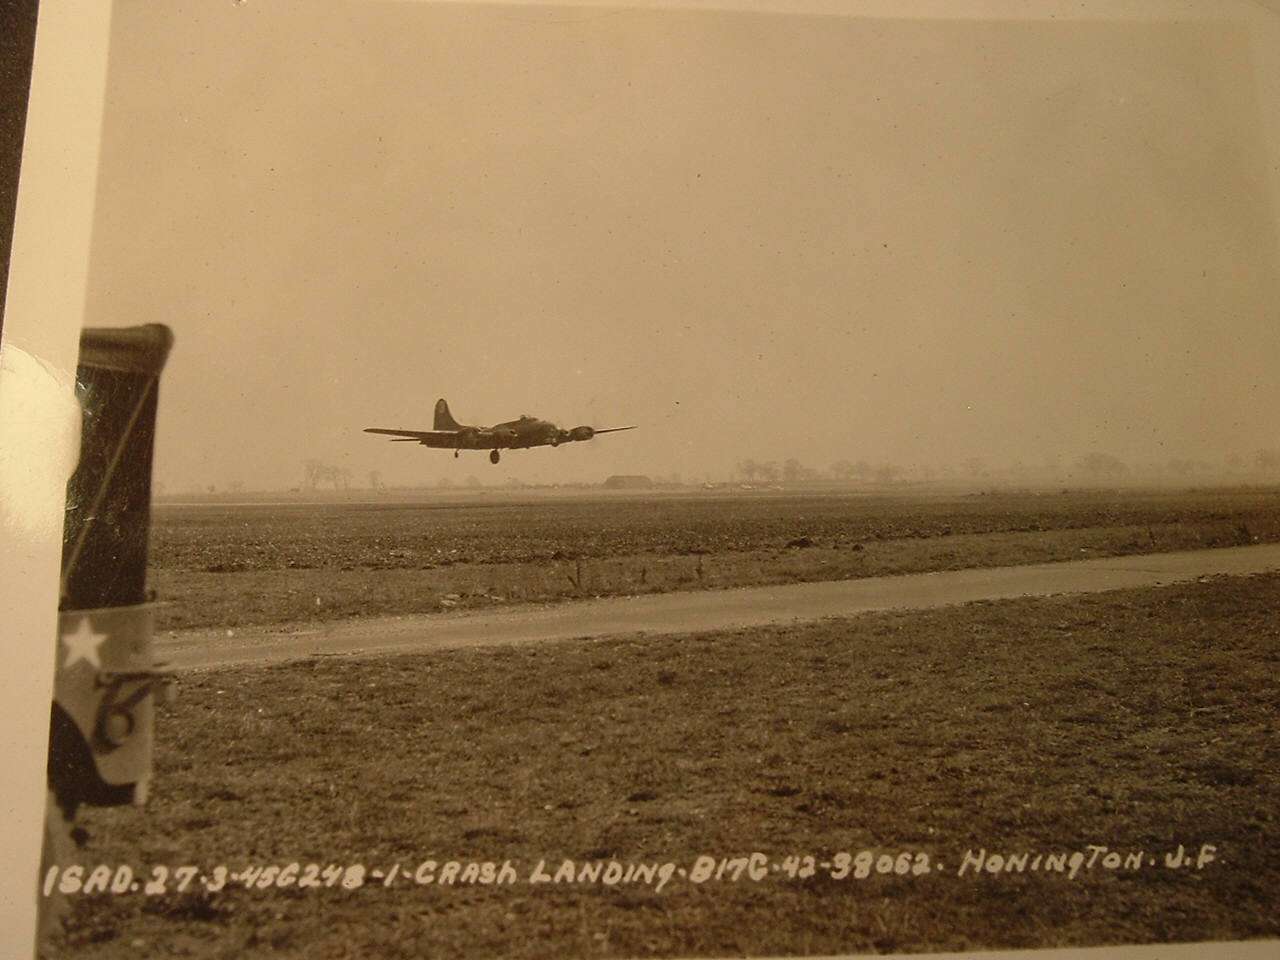 B-17G-25-DL 42-38052, with one main gear extended, just before crash landing at B-53, 1340 hours, 27 March 1945. (U.S. Air Force)